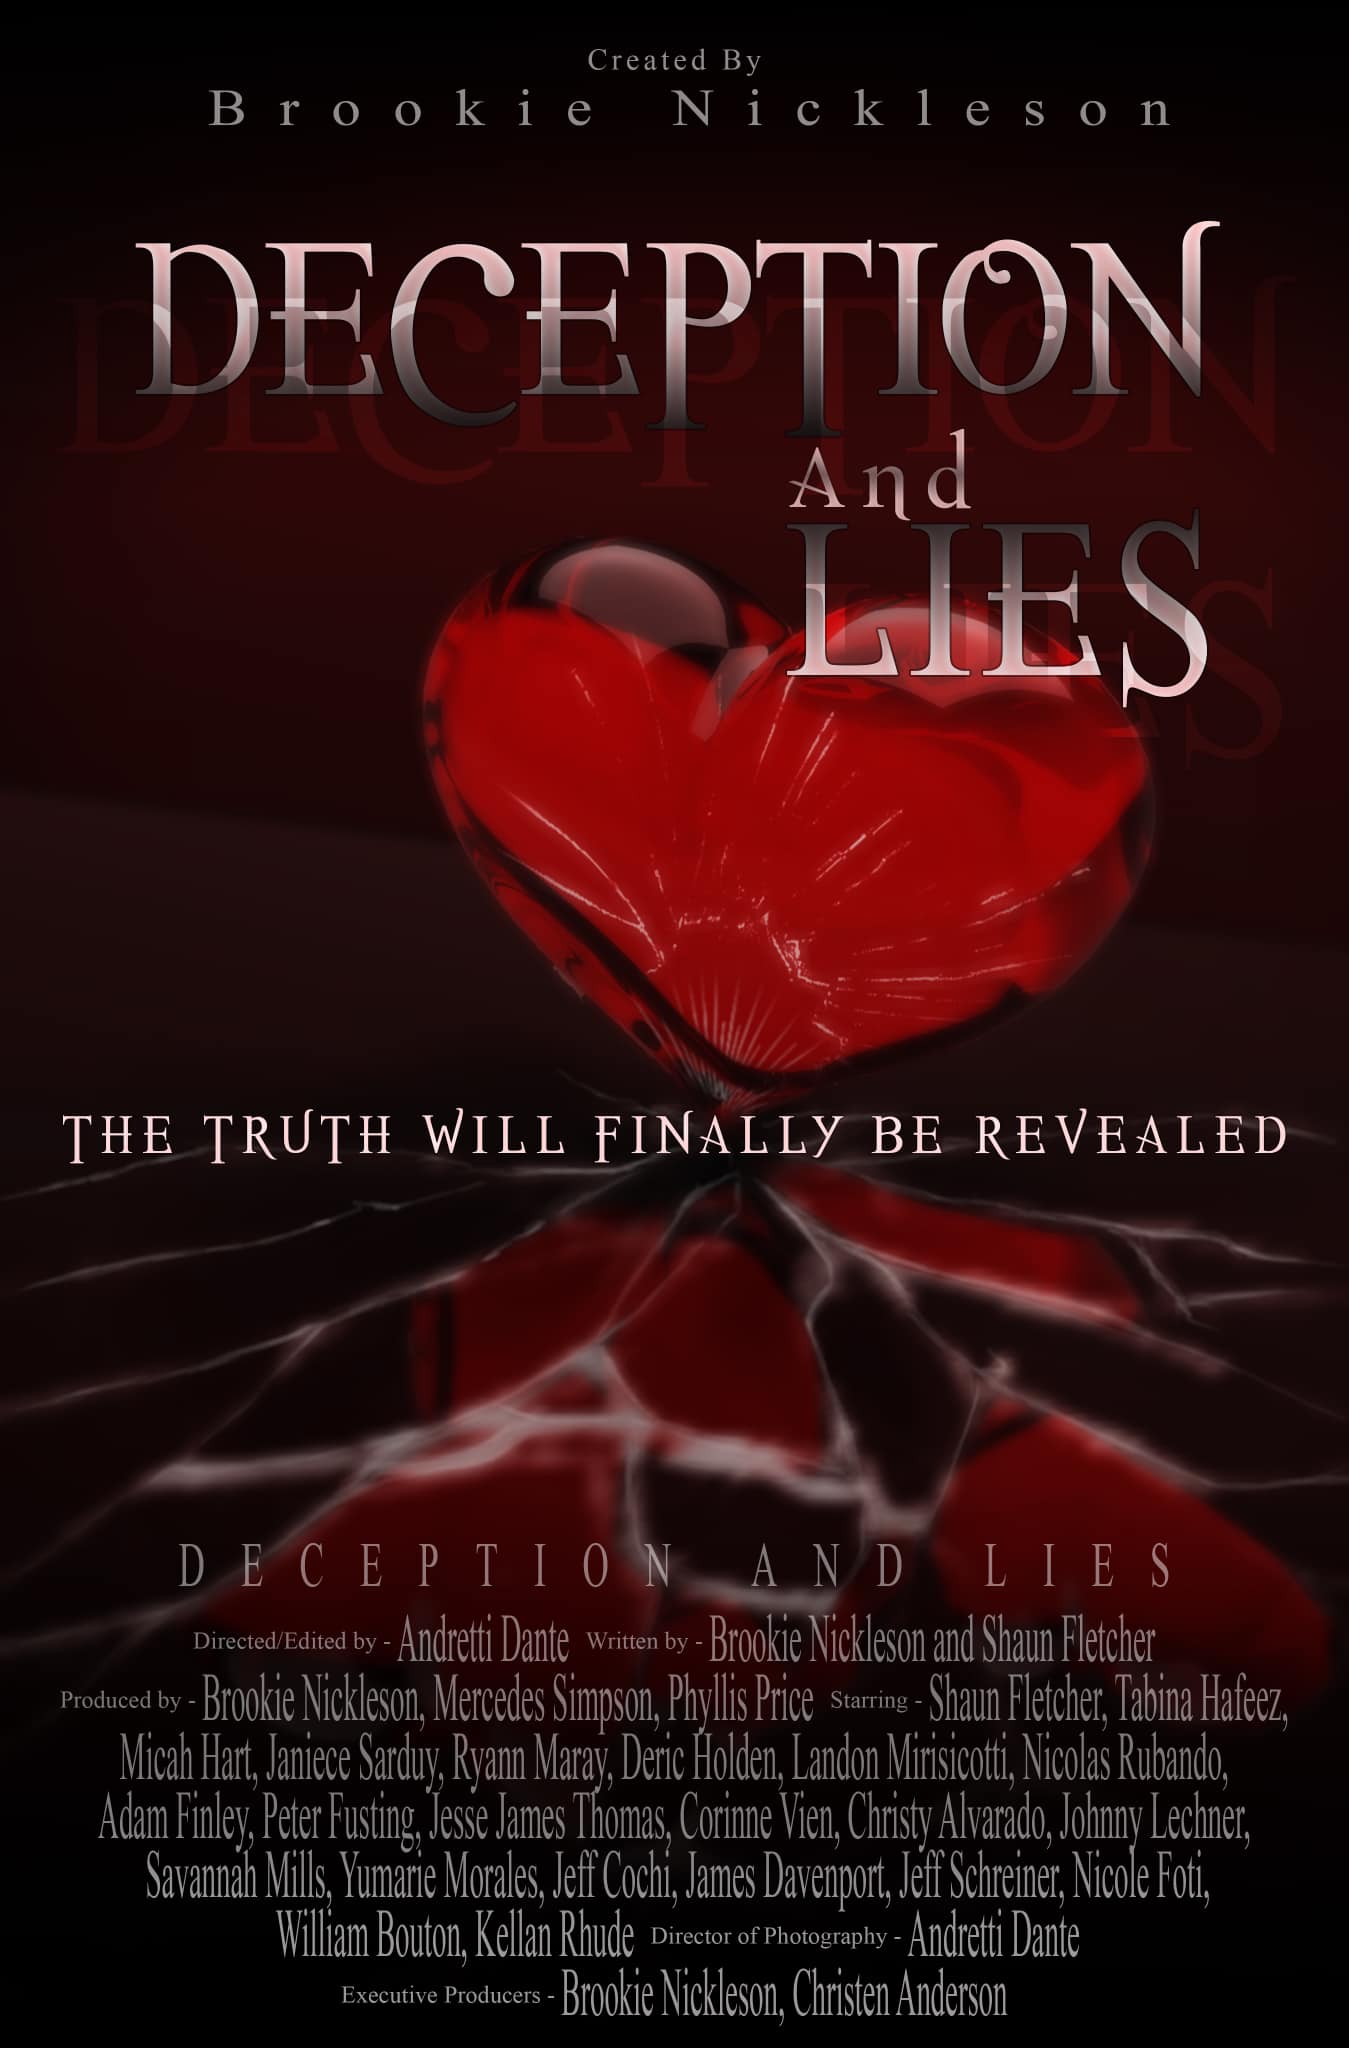 Deception and Lies (the movie) (2021)